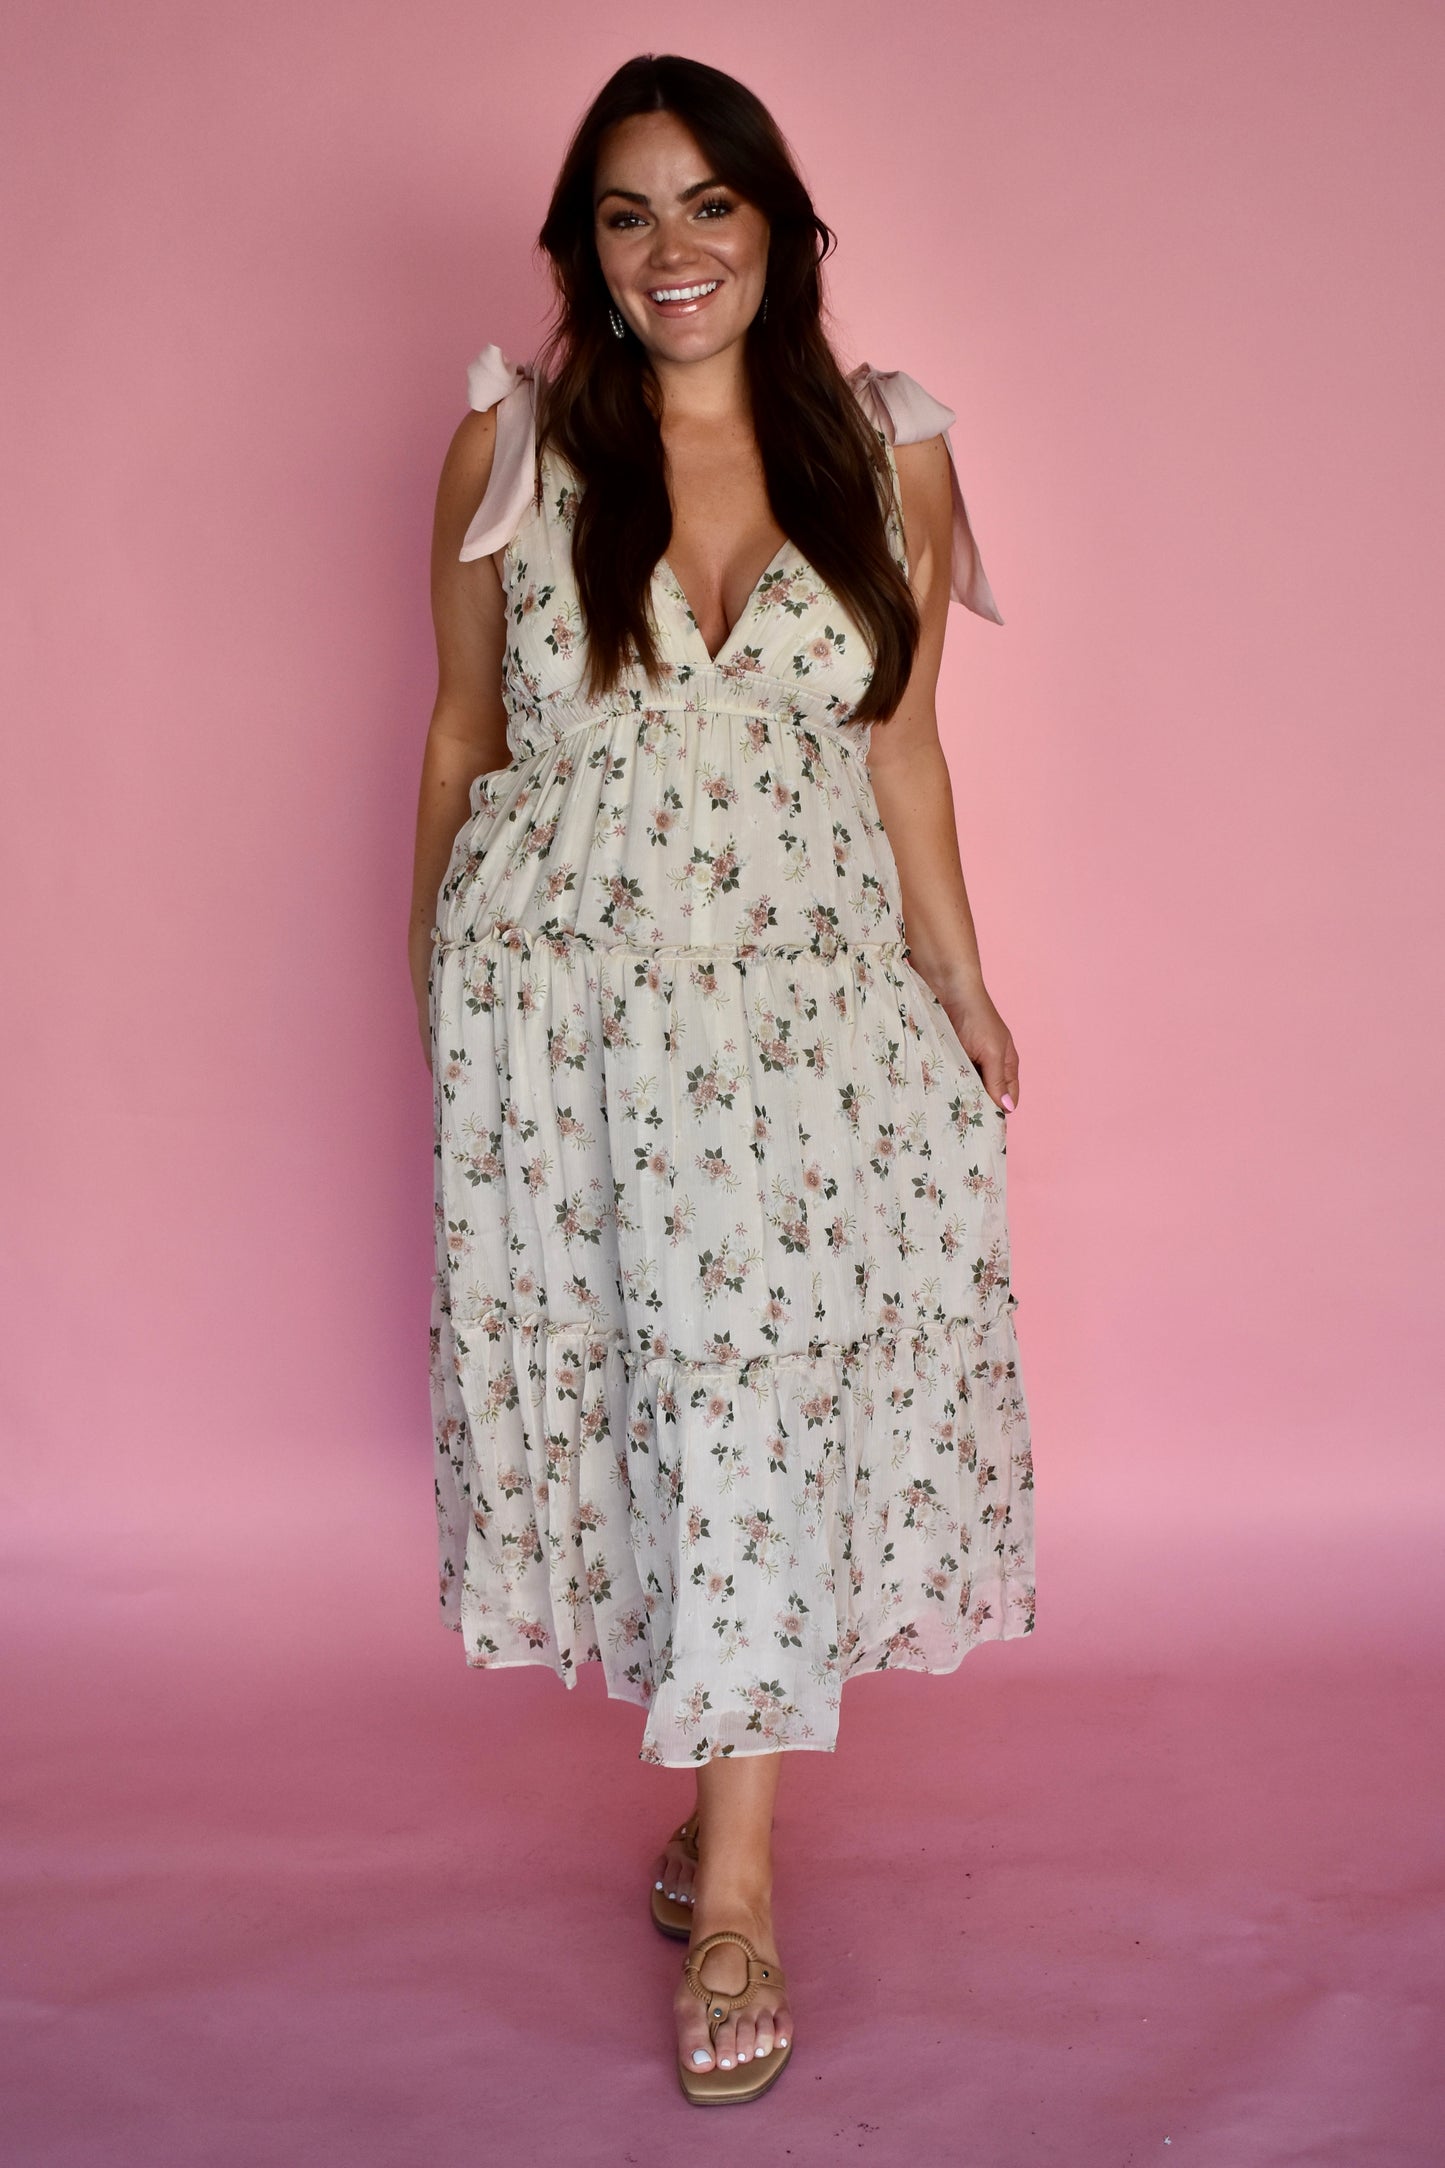 CREAM AND PINK FLORAL DRESS